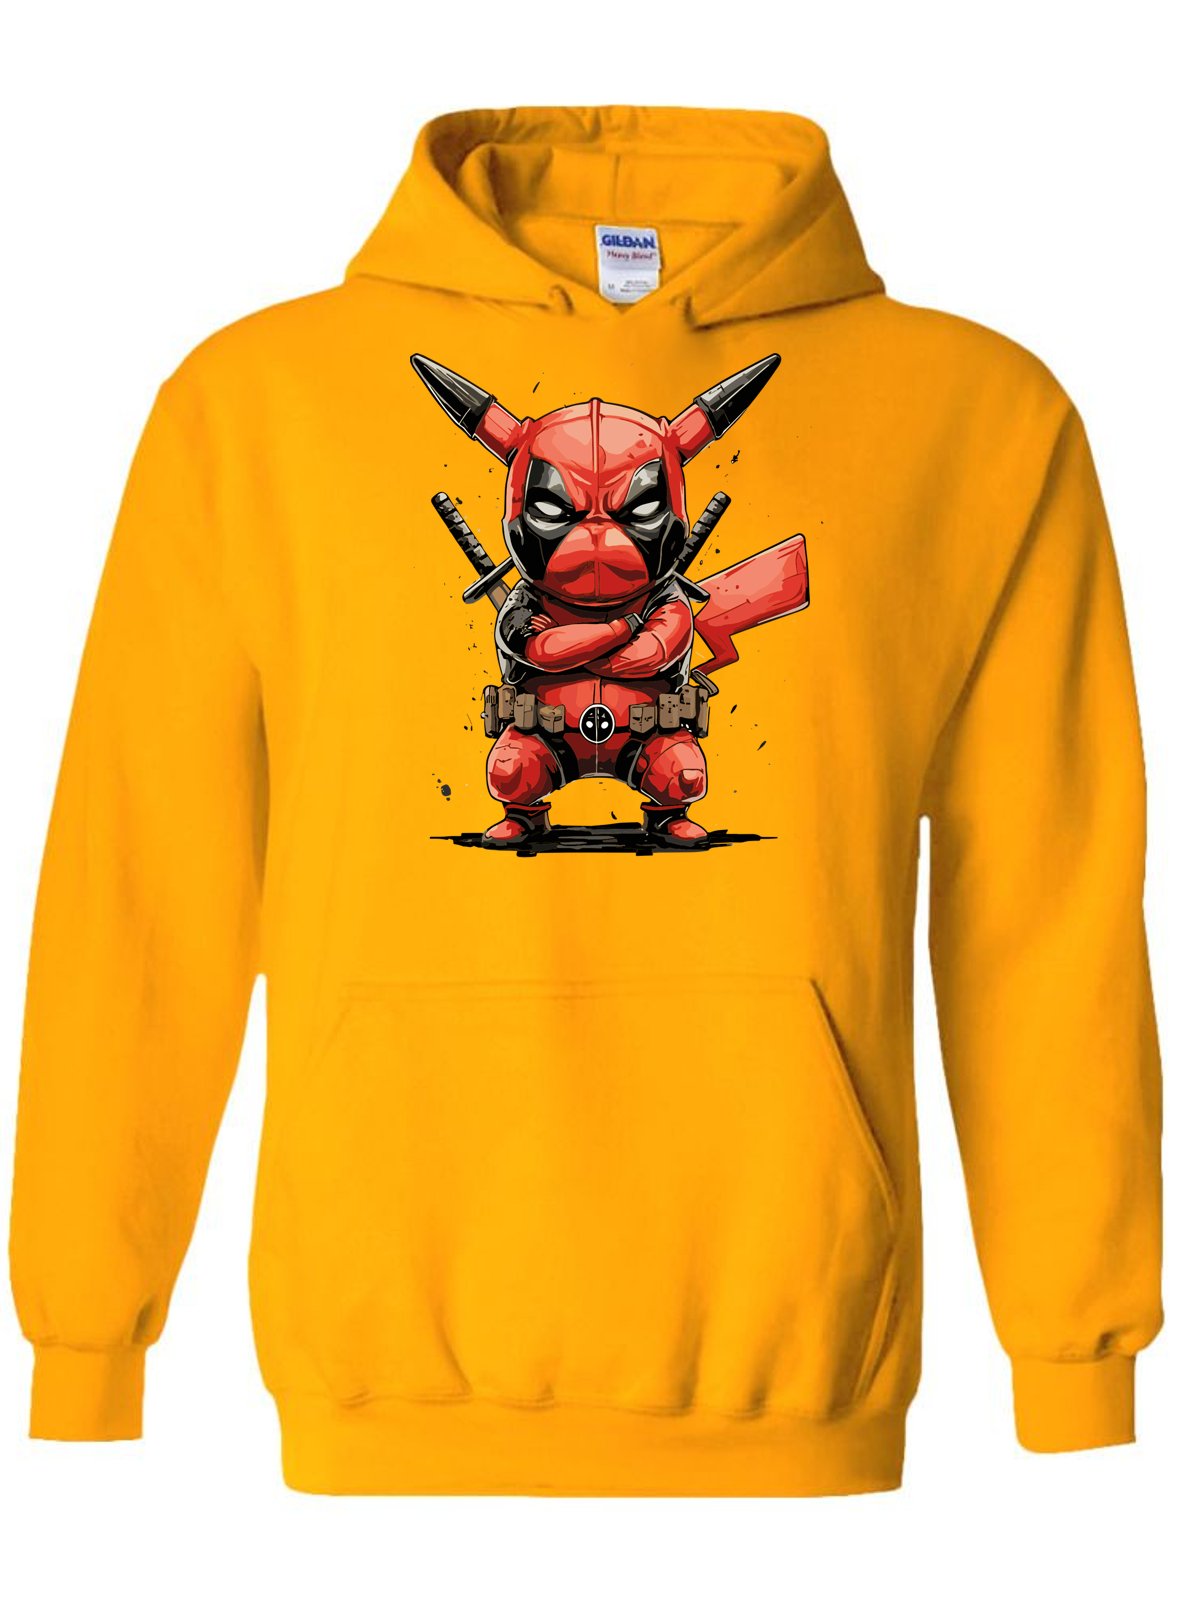 Pikachu Inspired as Deadpool Gold Graphic Hoodie – Limited Edition! -